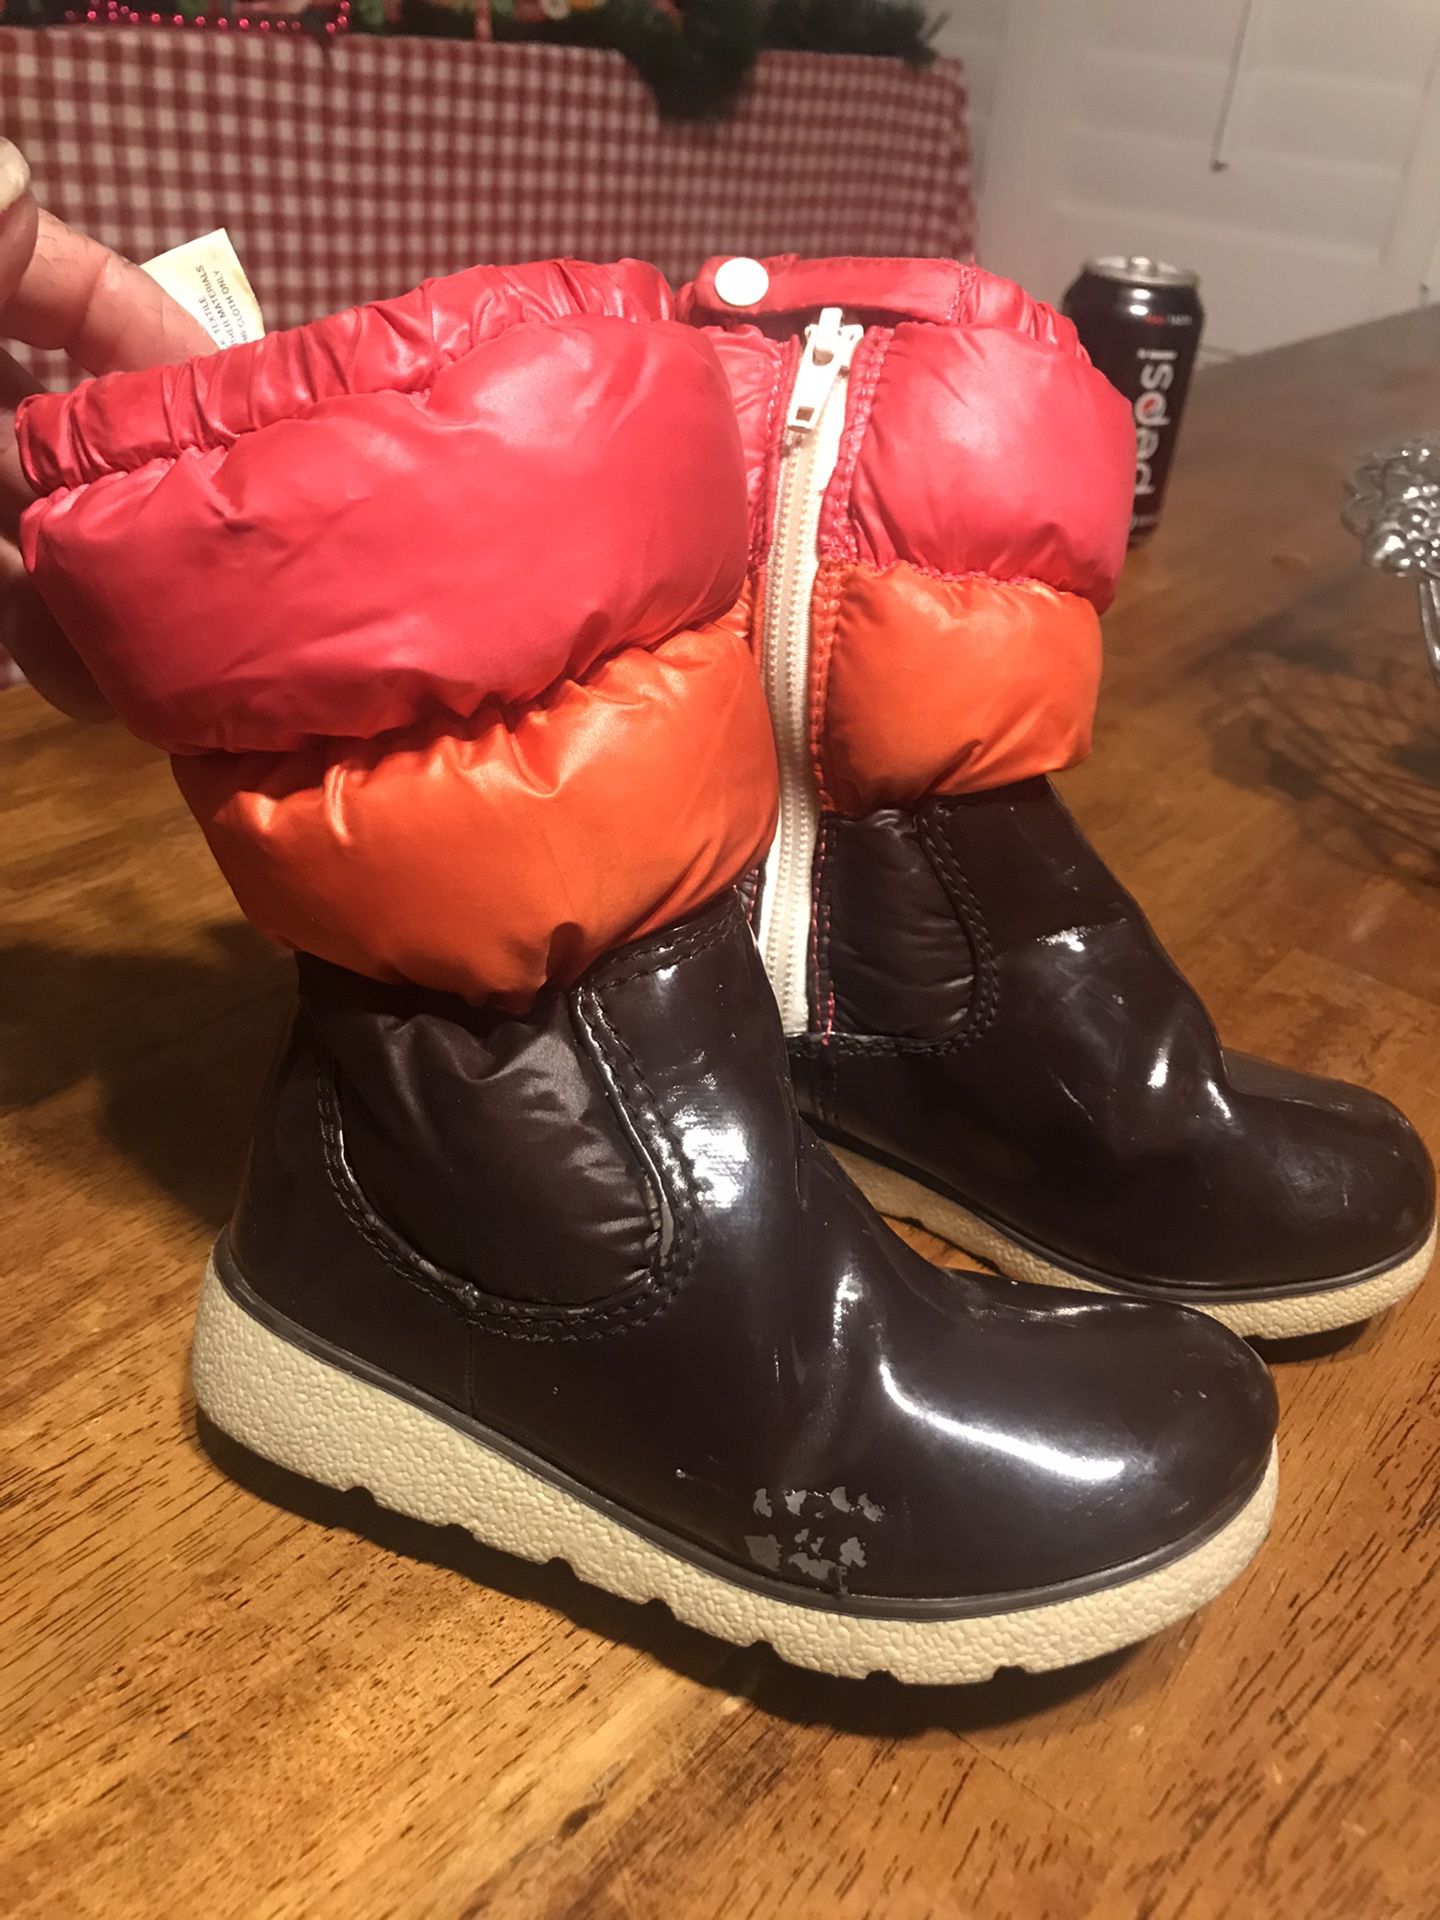 Toddler Winter Boots Size 10 girls